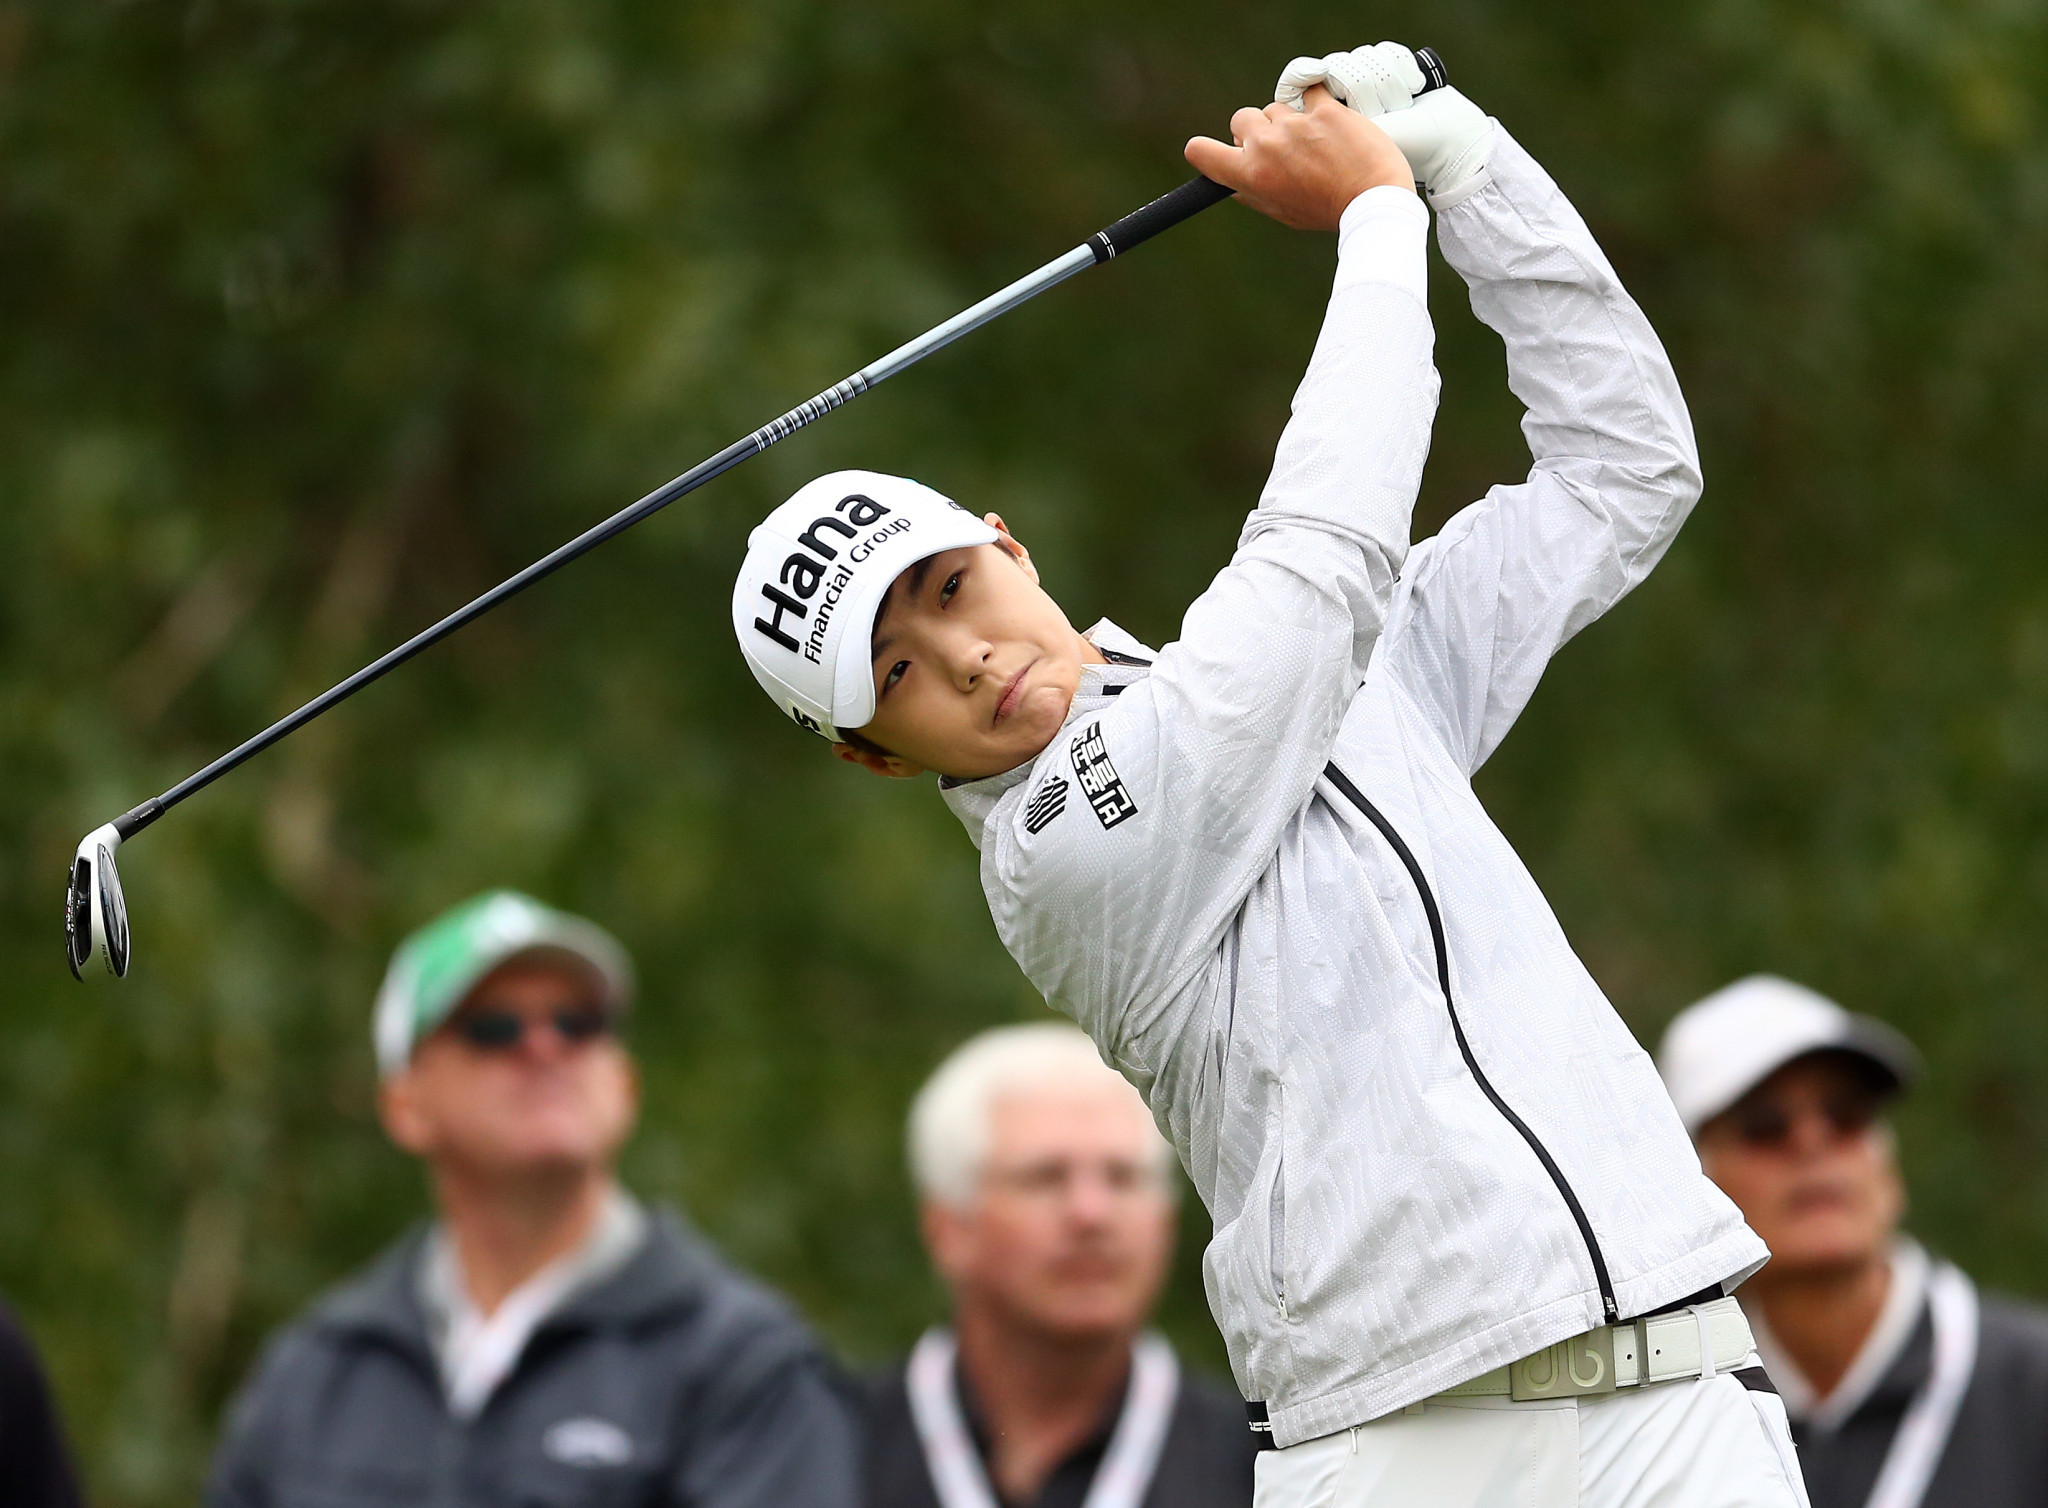 Sung Hyun Park will start as one of the favourites to win the Evian Championship ©Getty Images